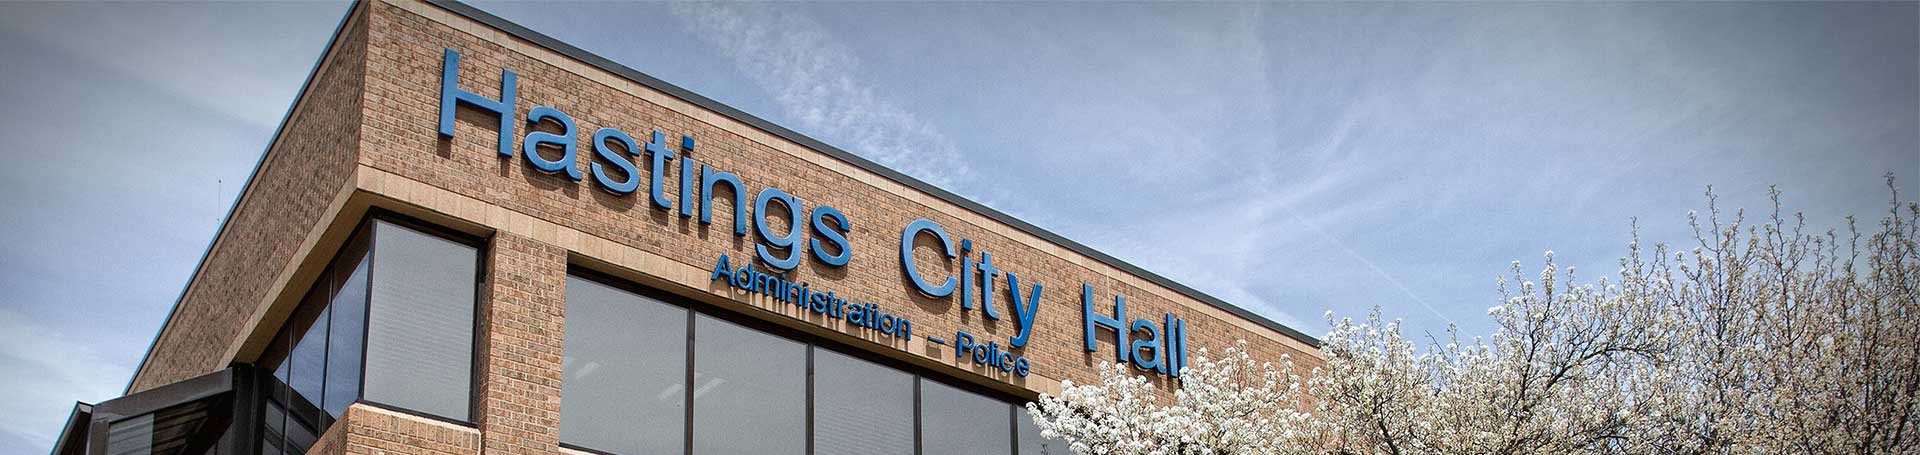 This is a photo of Hastings City Hall Building